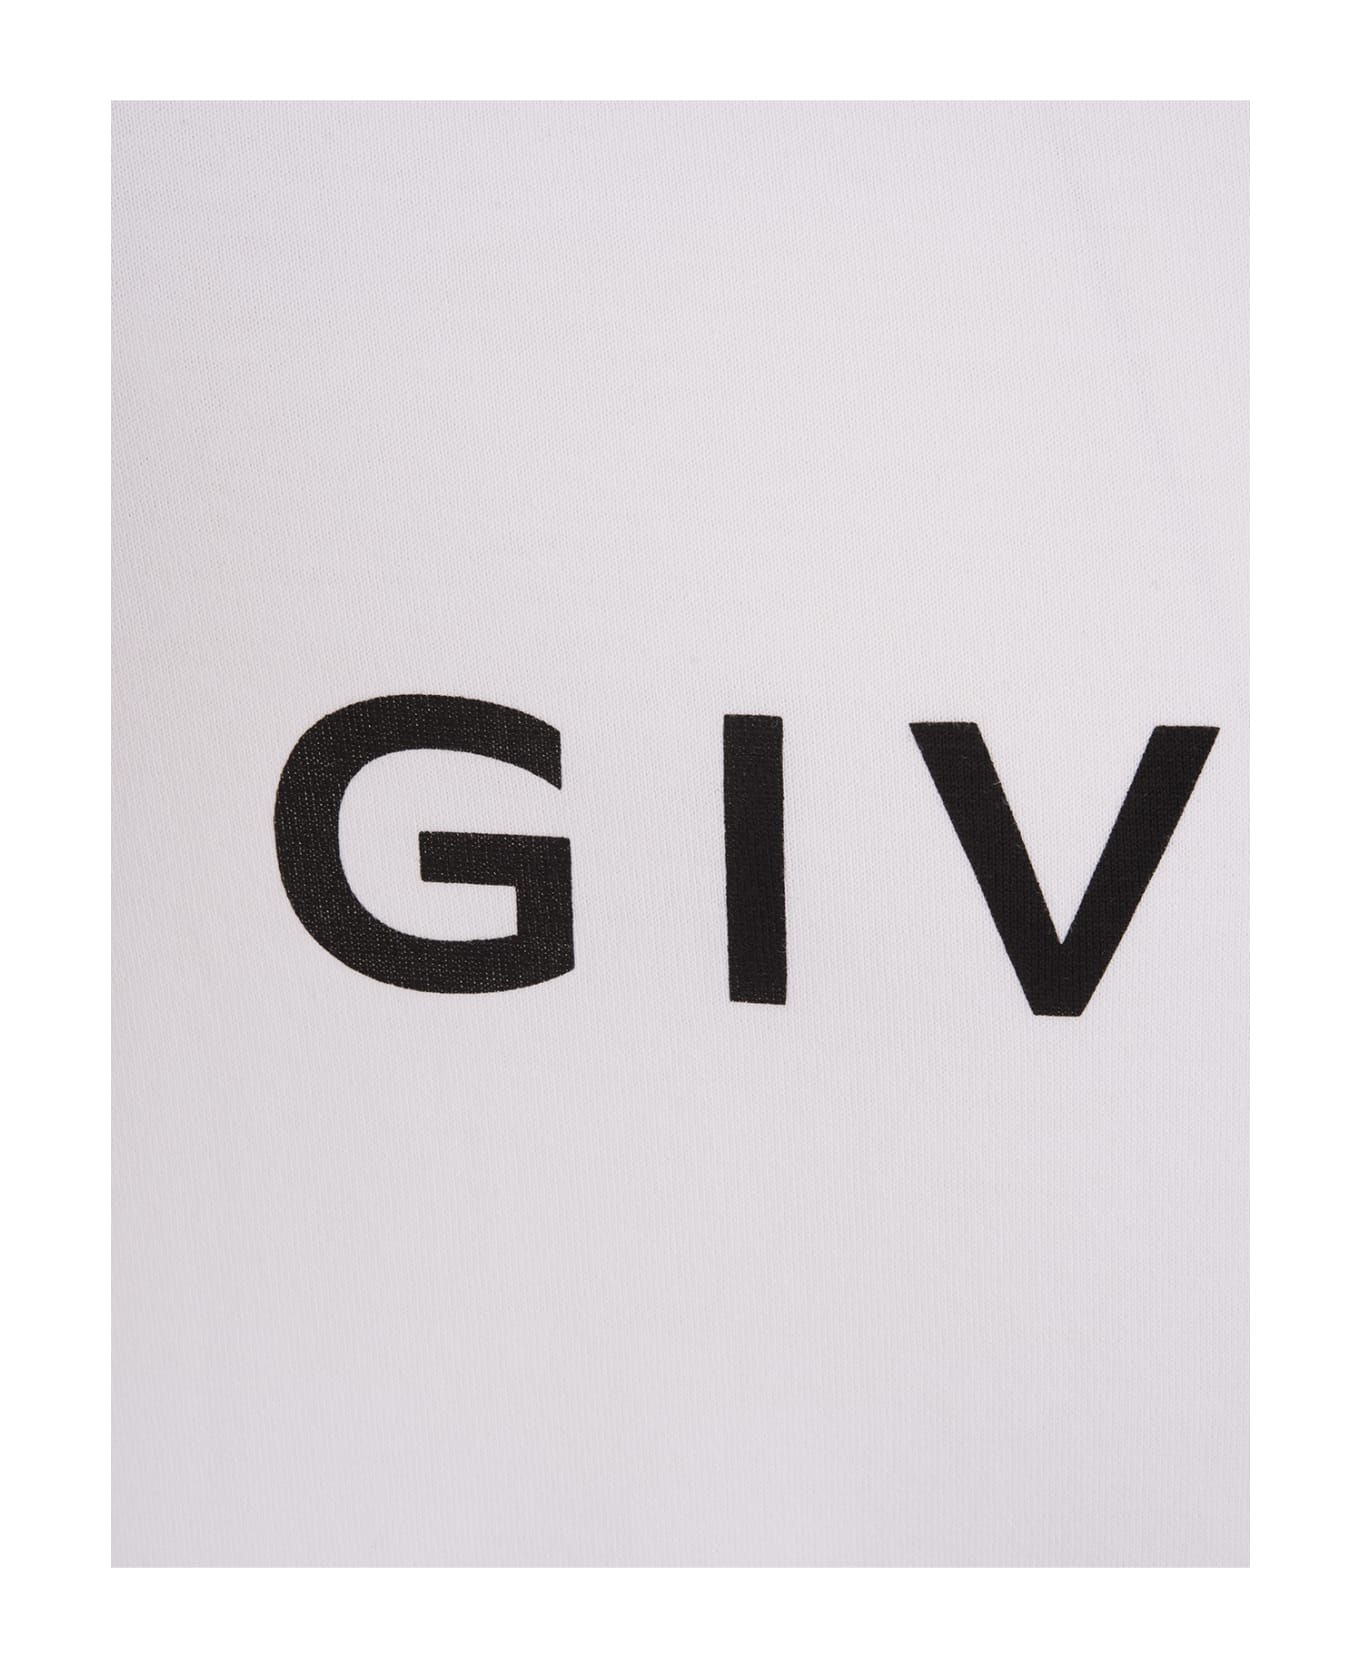 Givenchy White T-shirt With Givenchy Archetype Print On Front - White シャツ